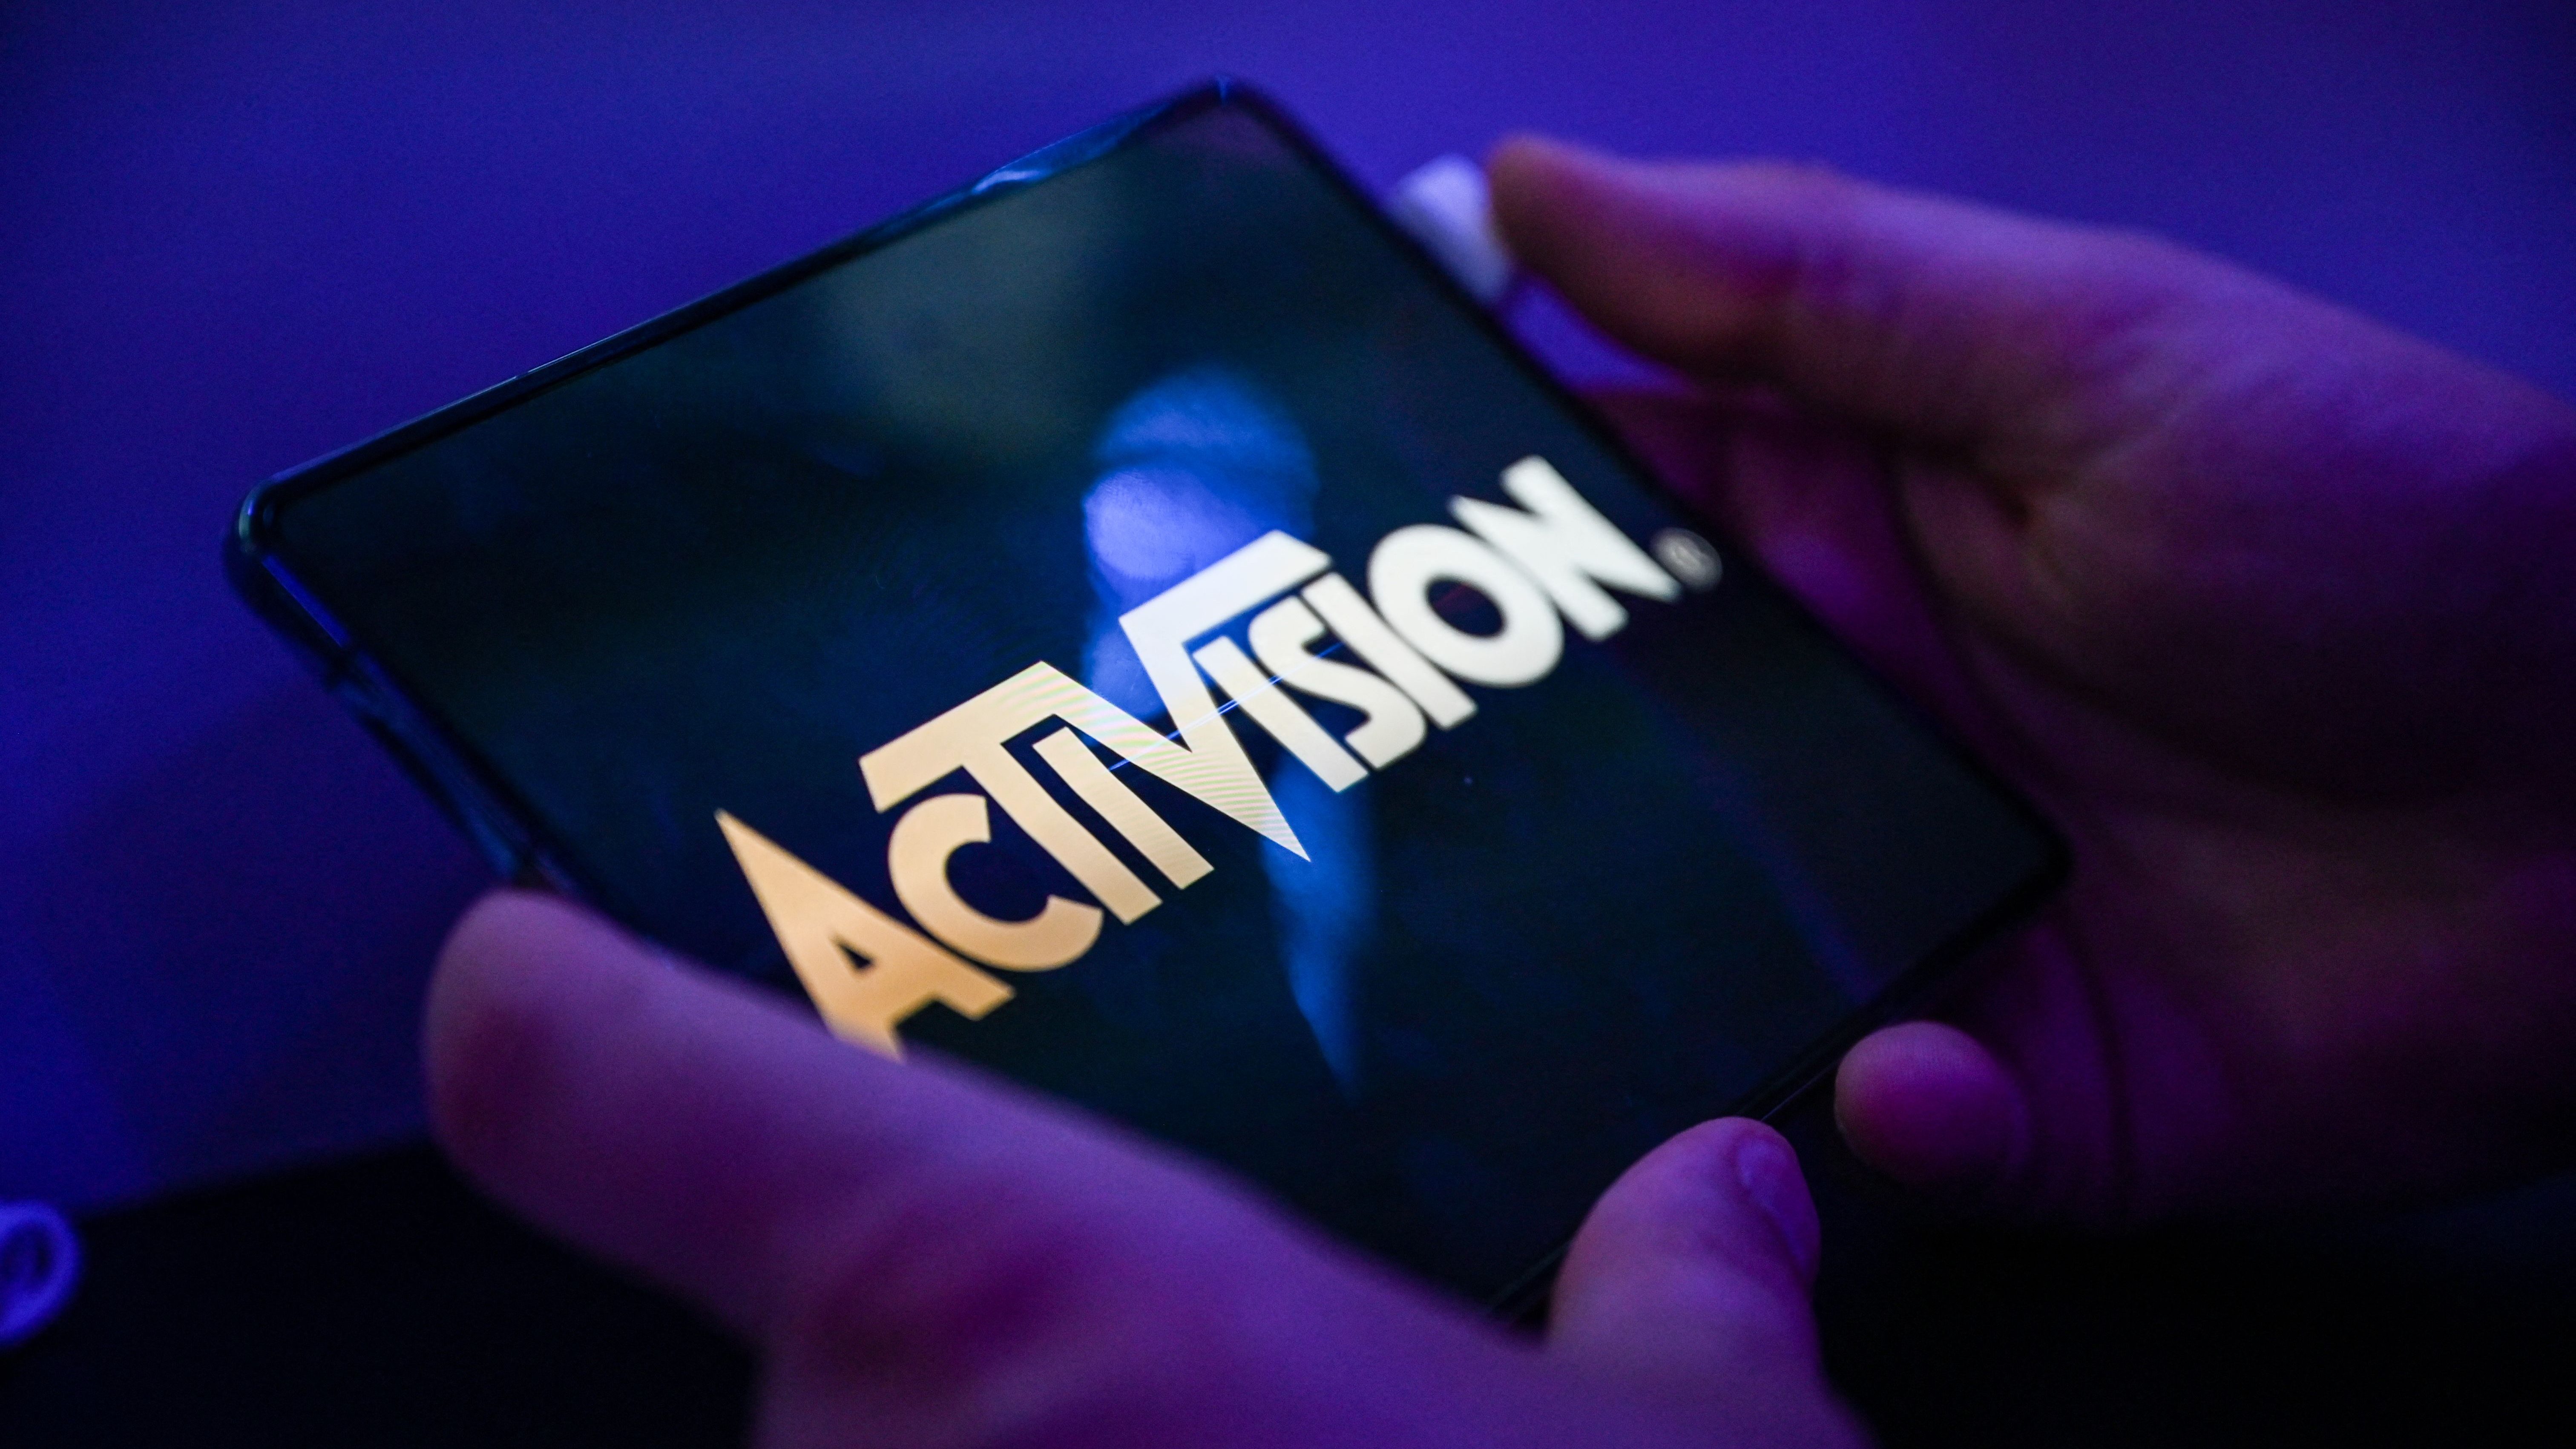 Microsoft's Activision Blizzard takeover faces further competition  investigation